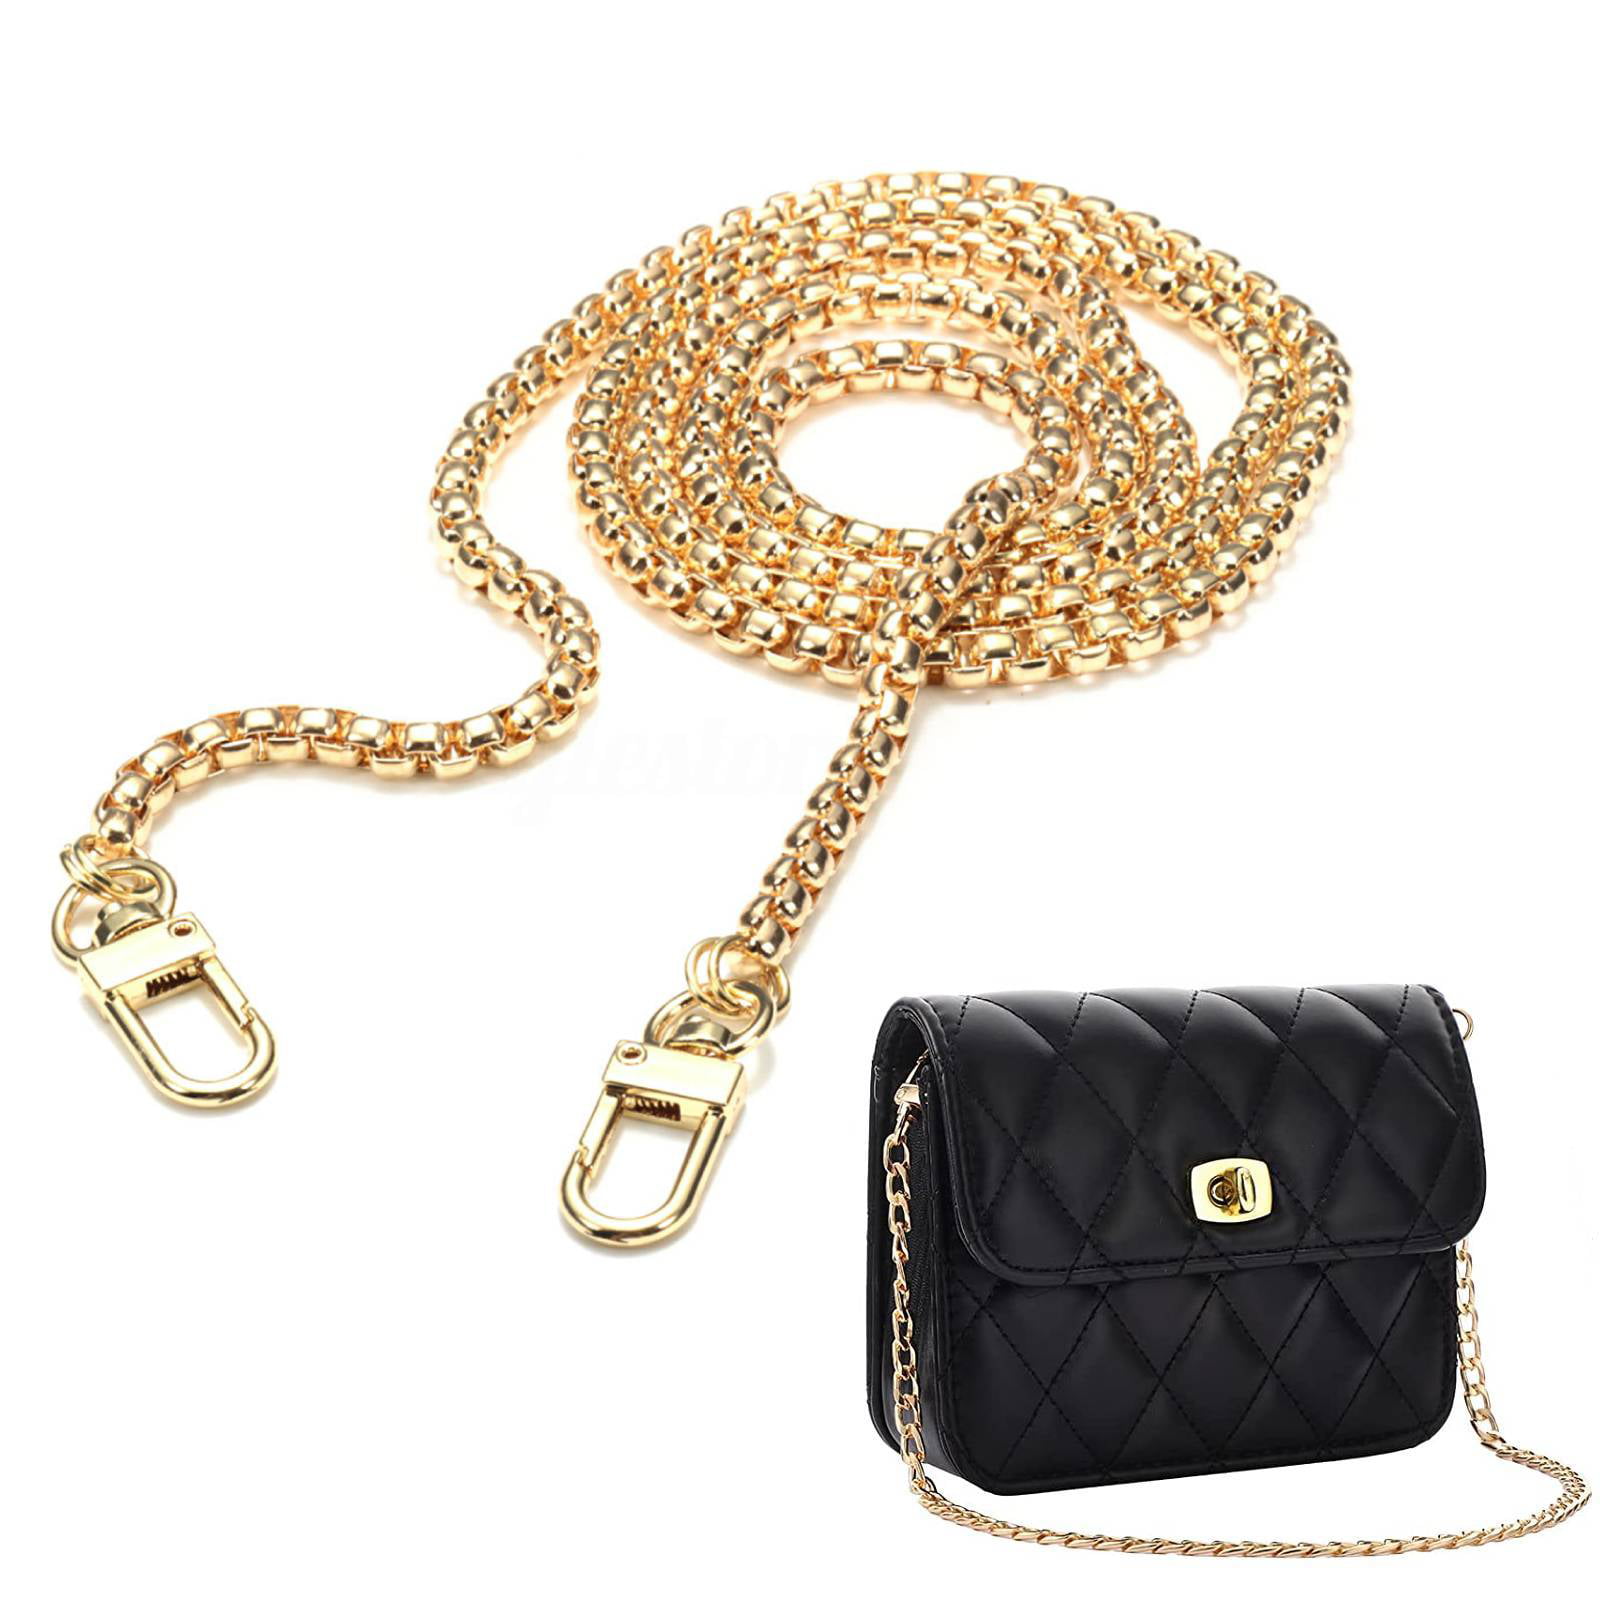 New Metal And Leather Bag Chain Strap Replacement For Purse Handbag Shoulder Bag 